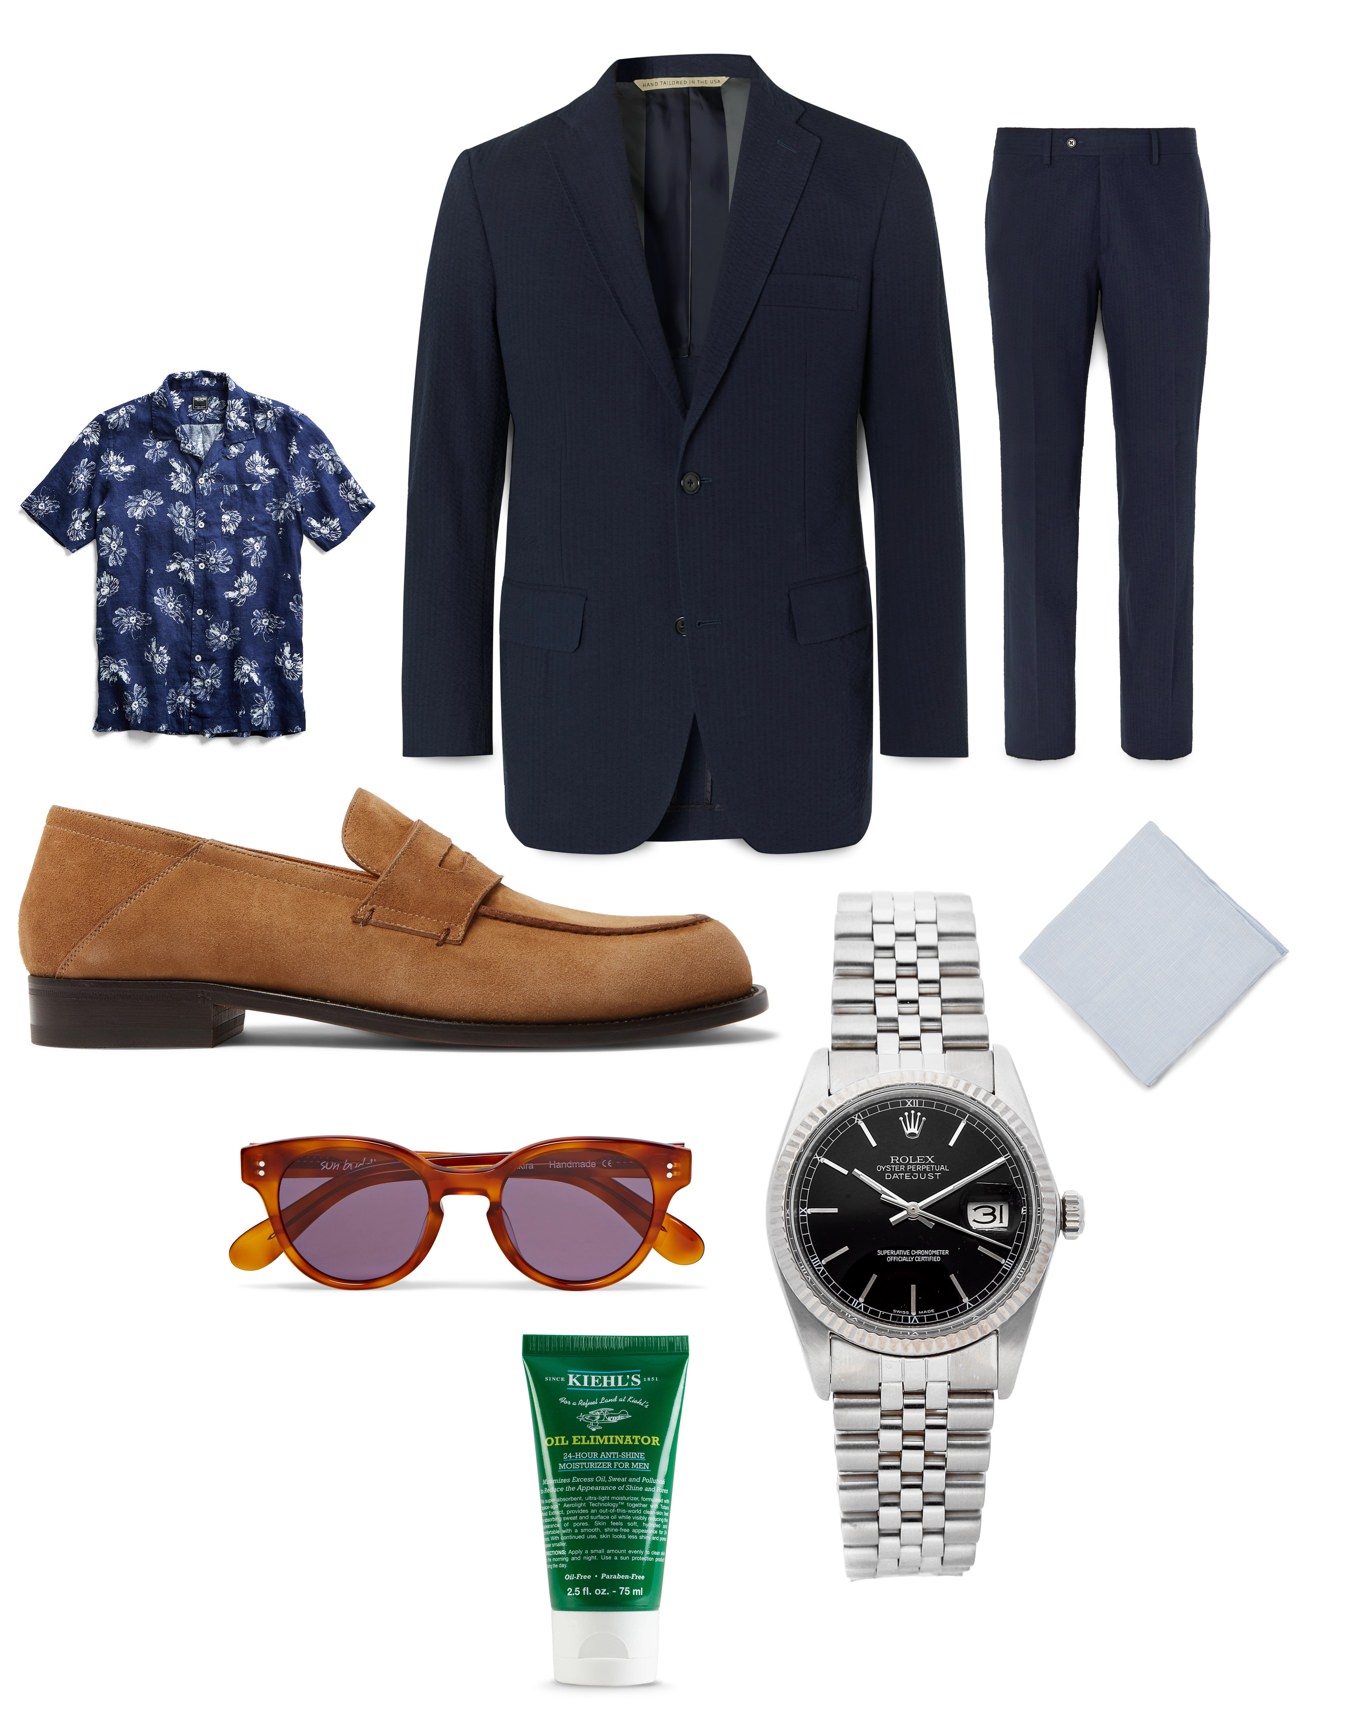 Men's spring and summer wedding outfit inspiration